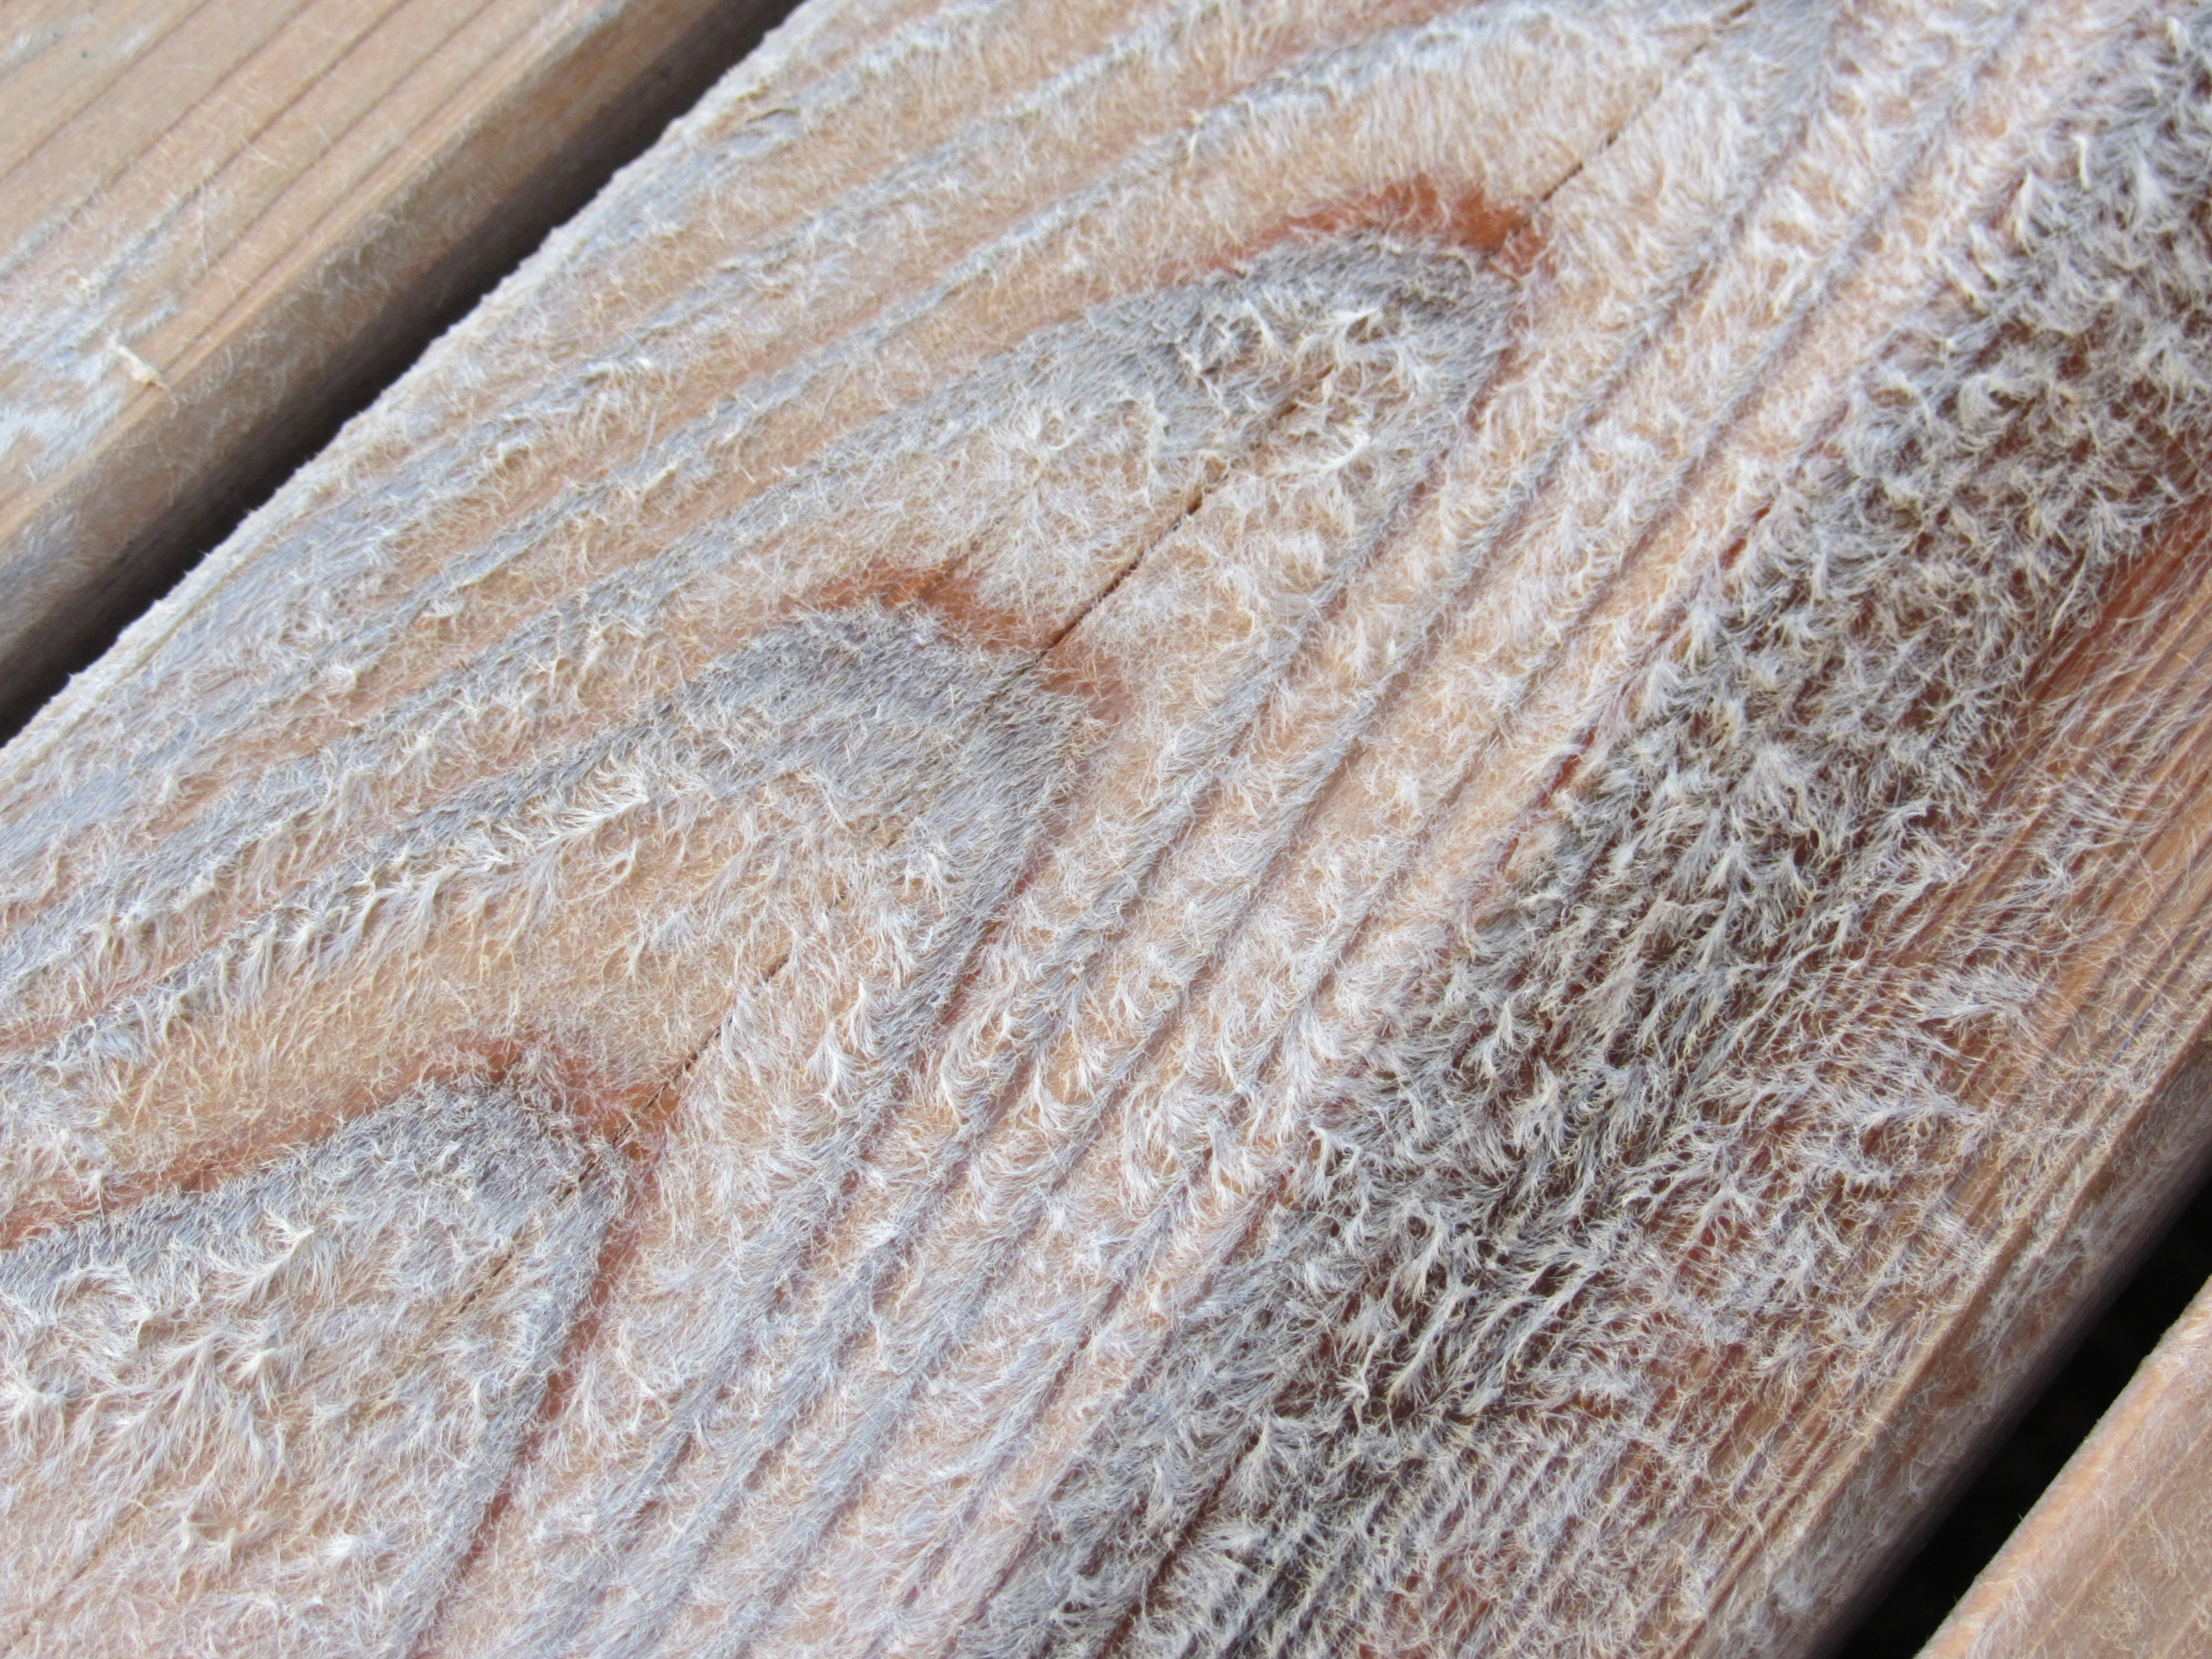 Deck Fuzzy After Power Washing 